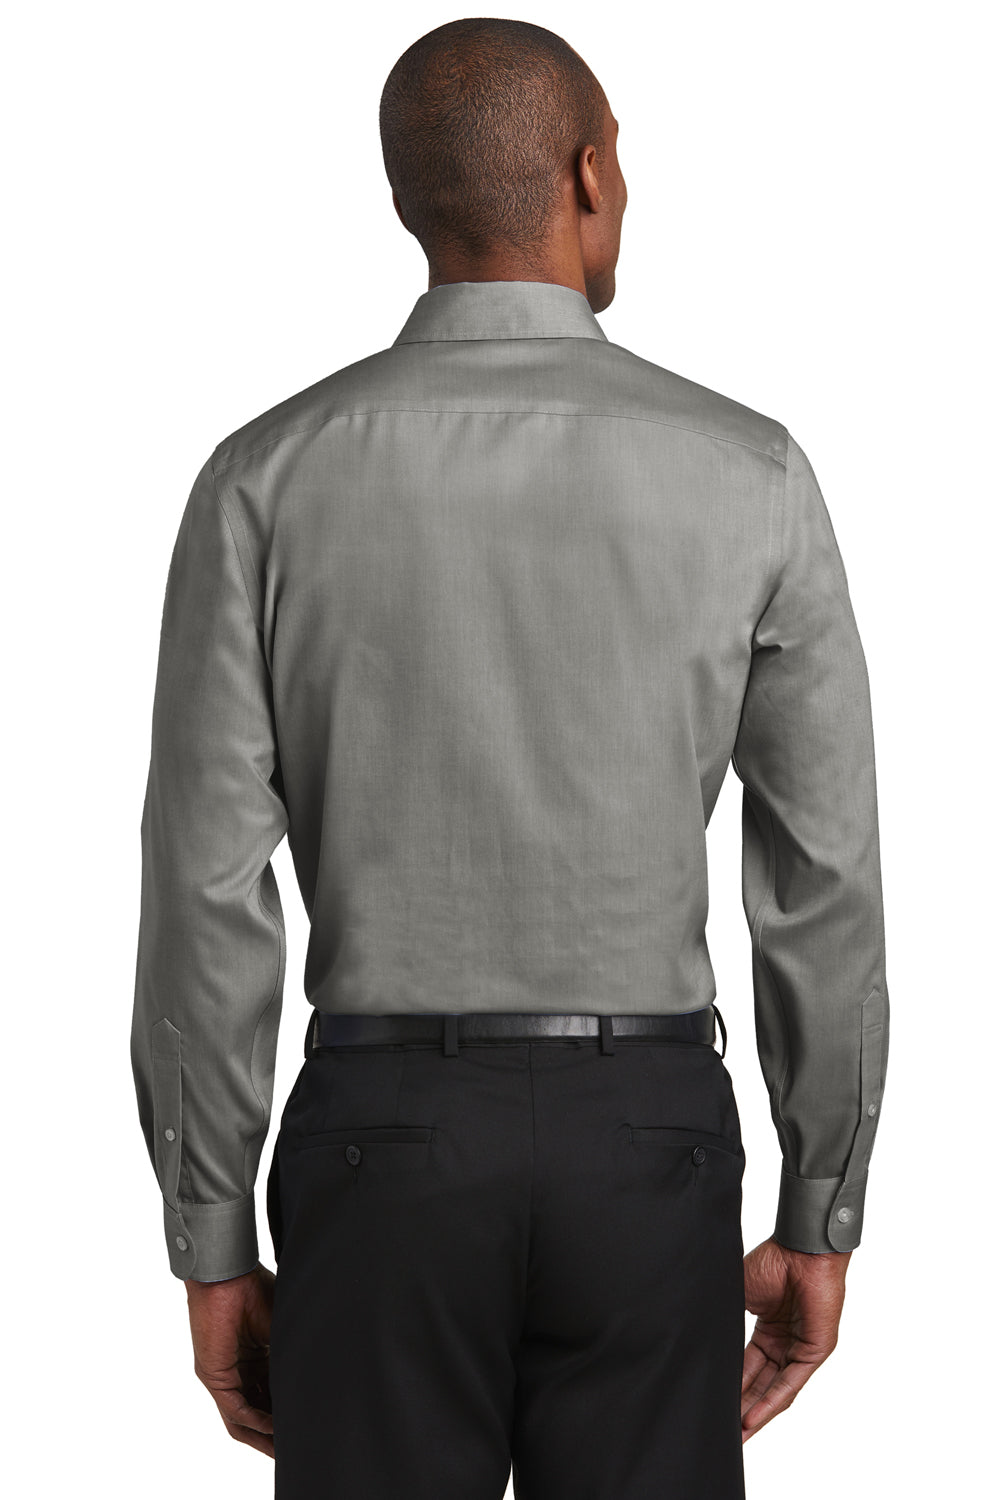 Red House RH620 Mens Pinpoint Oxford Wrinkle Resistant Long Sleeve Button Down Shirt Charcoal Grey Back